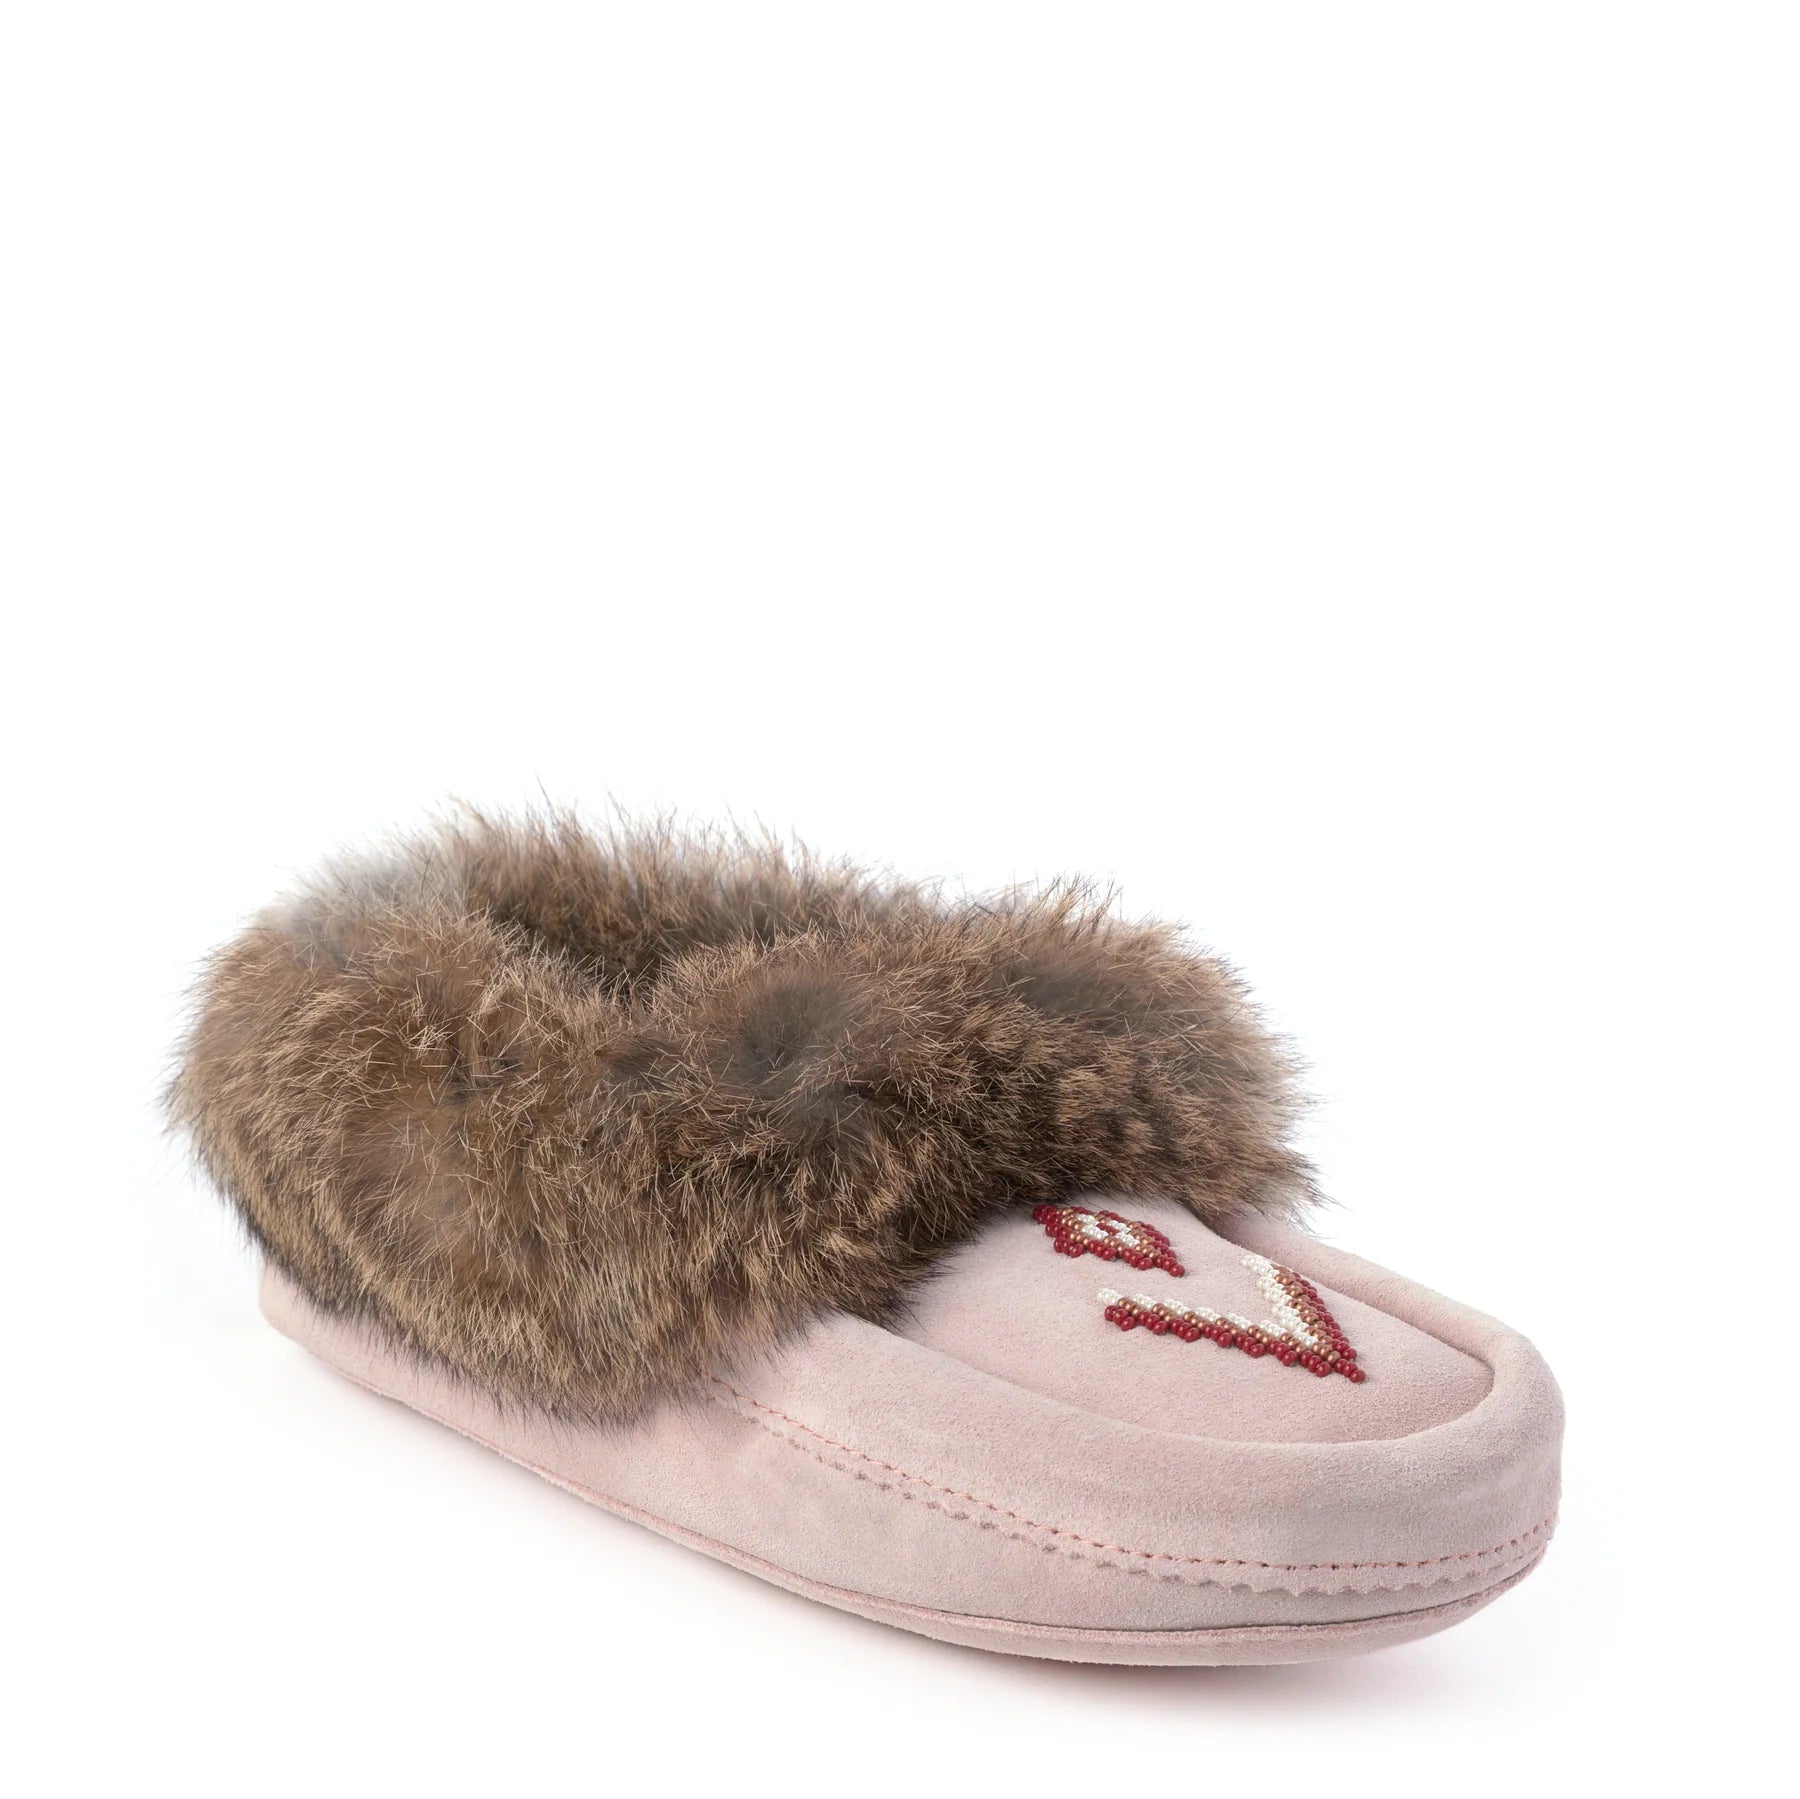 Tipi Moccasins - 10 / Pink/Rose - 40200 Pink/Rose - House of Himwitsa Native Art Gallery and Gifts